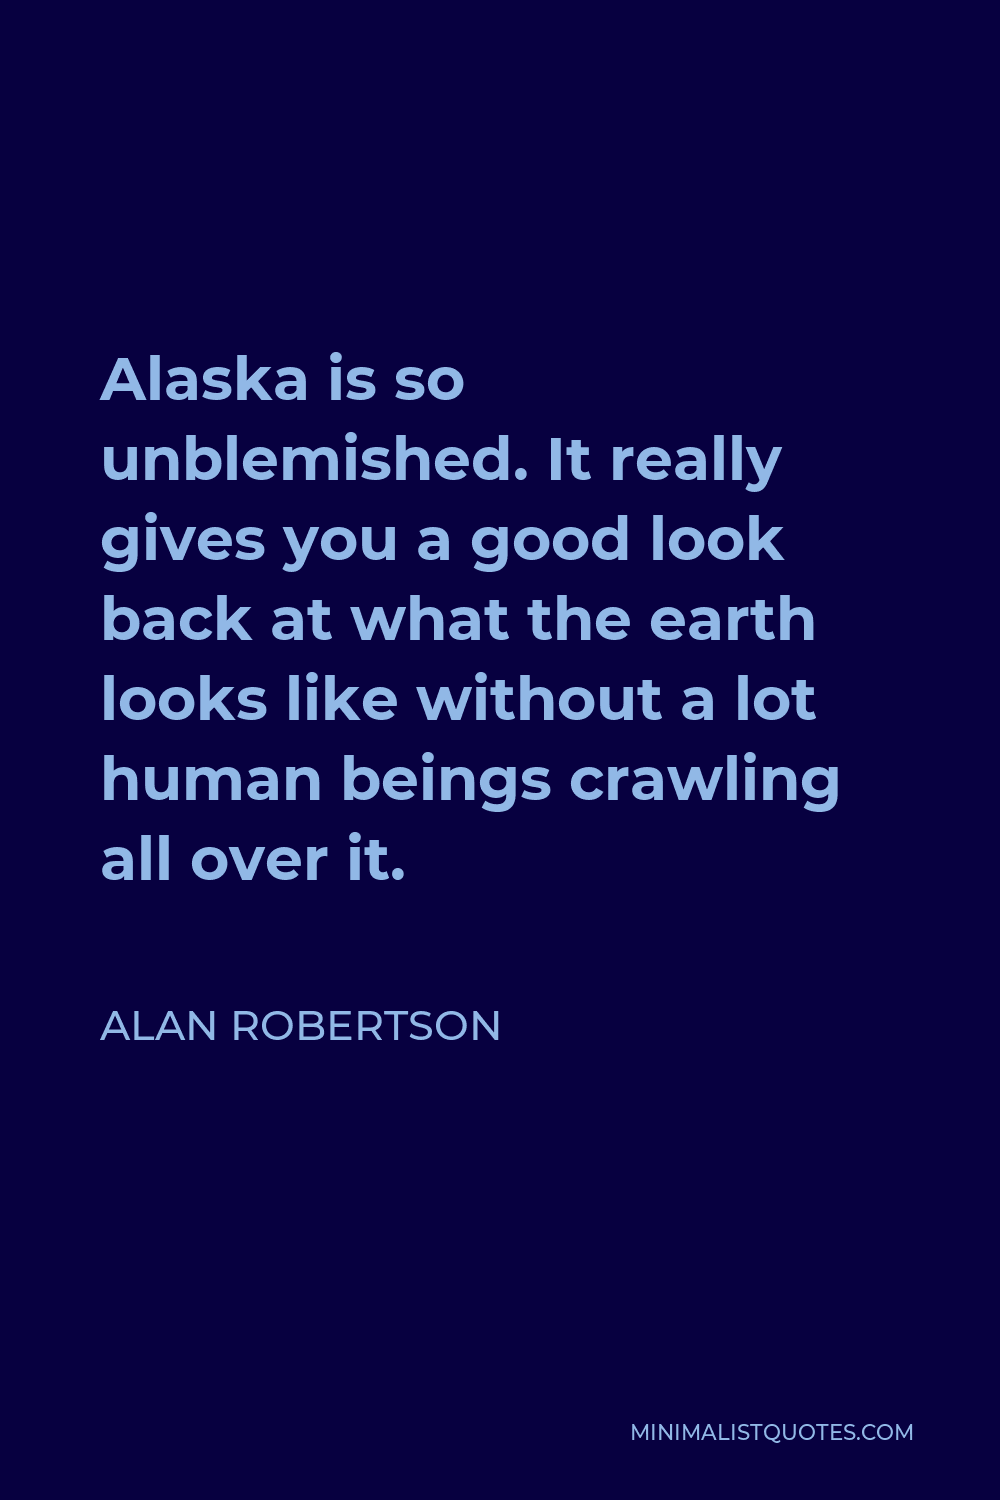 Alan Robertson Quote - Alaska is so unblemished. It really gives you a good look back at what the earth looks like without a lot human beings crawling all over it.